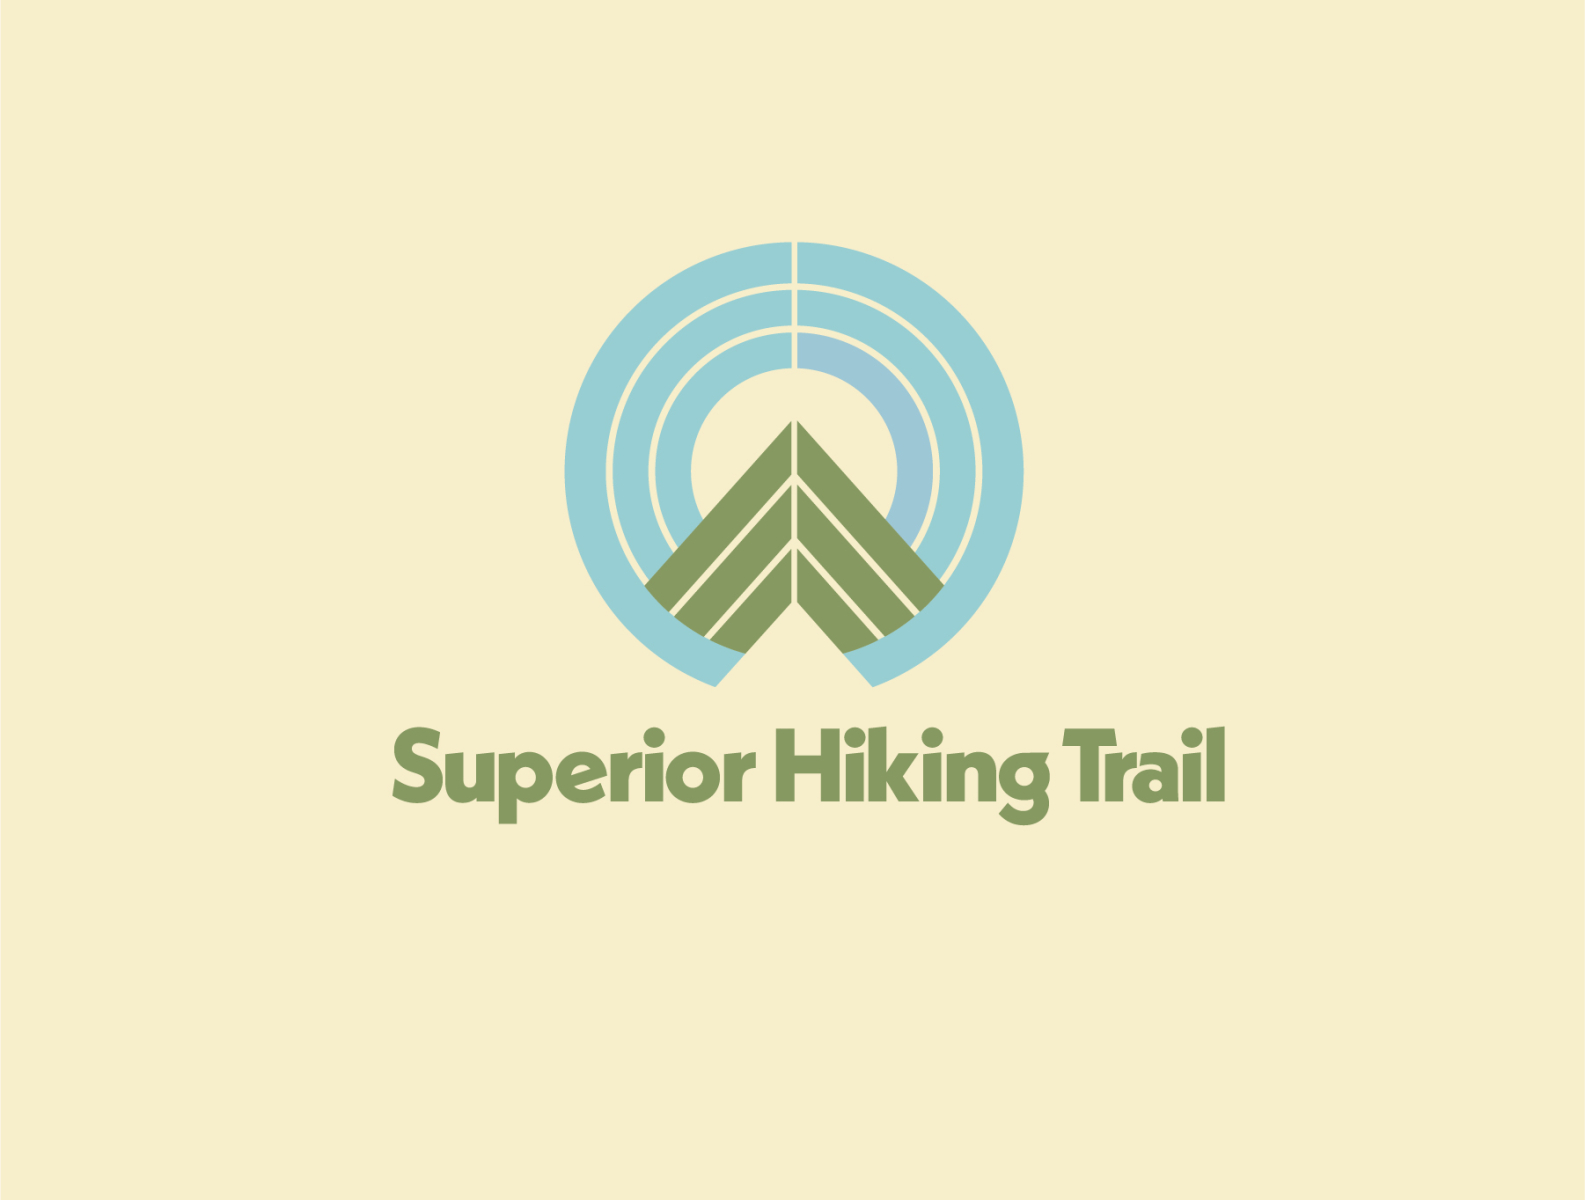 Superior Hiking Trail by Laurie Hawton on Dribbble